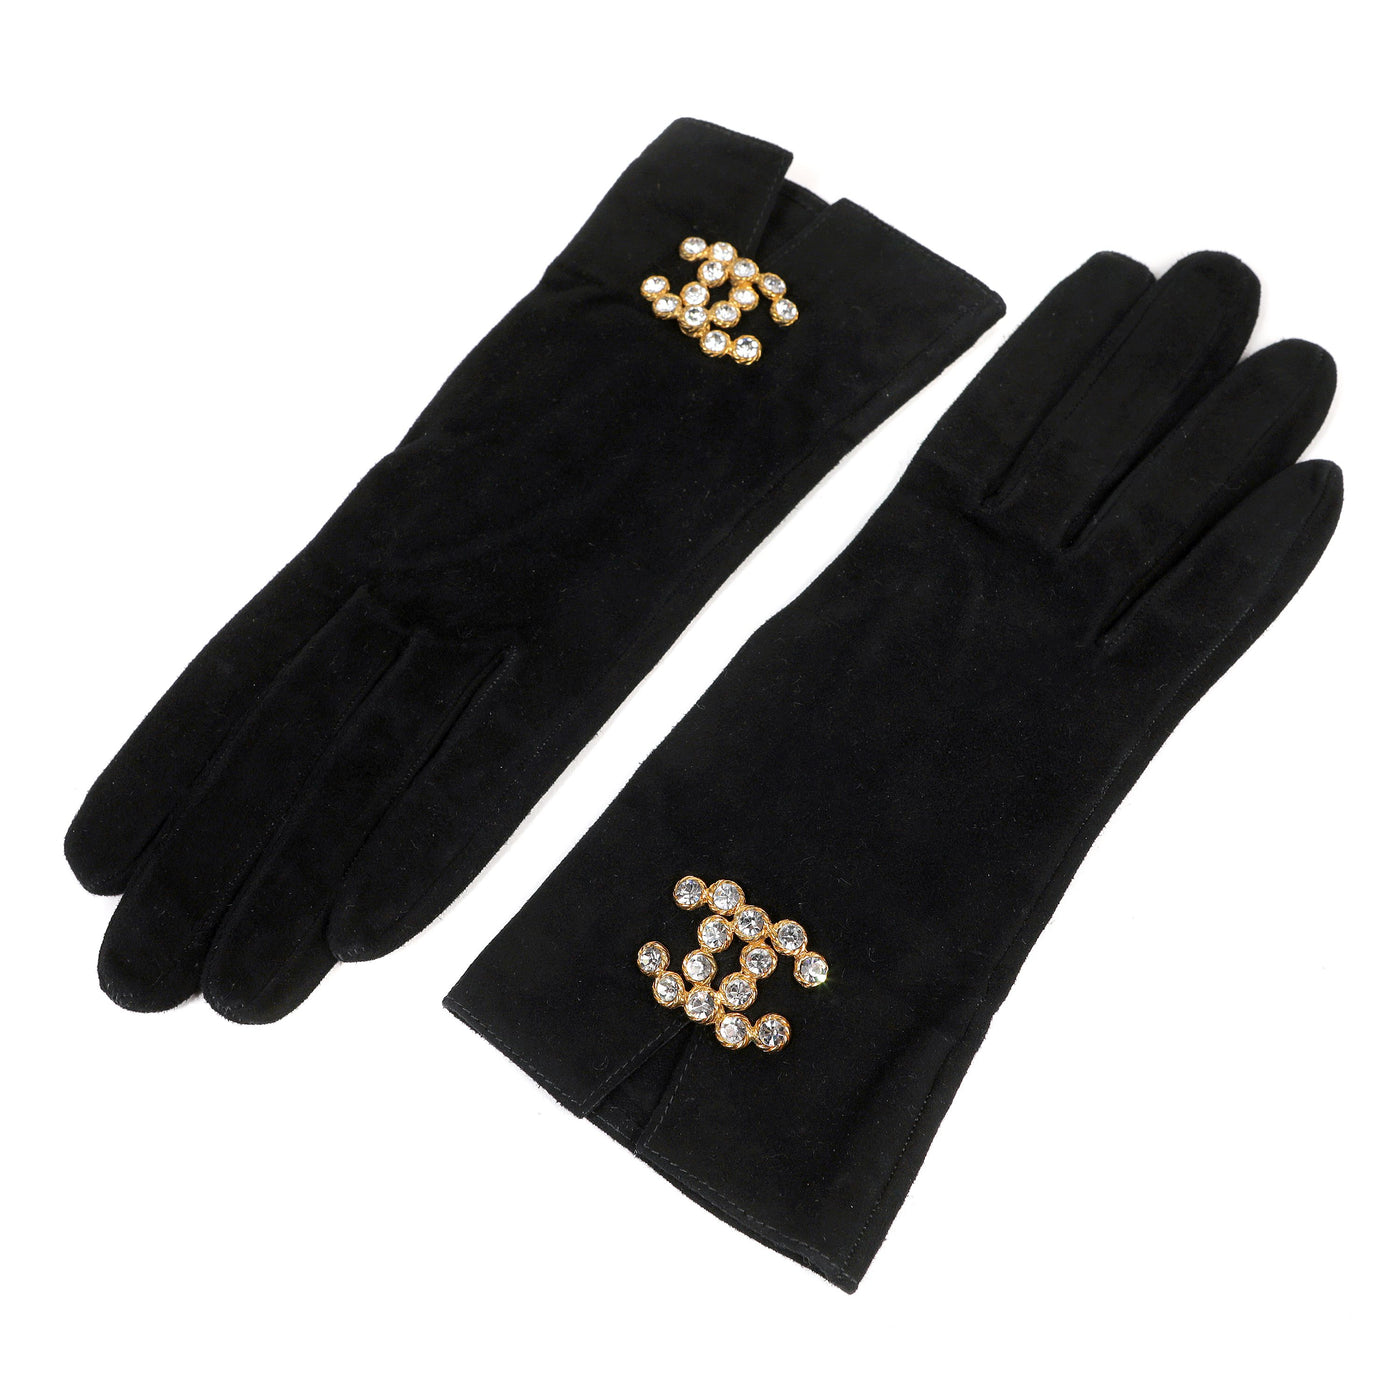 Chanel Black Suede X- Small Gloves w/ Crystal CC Detail